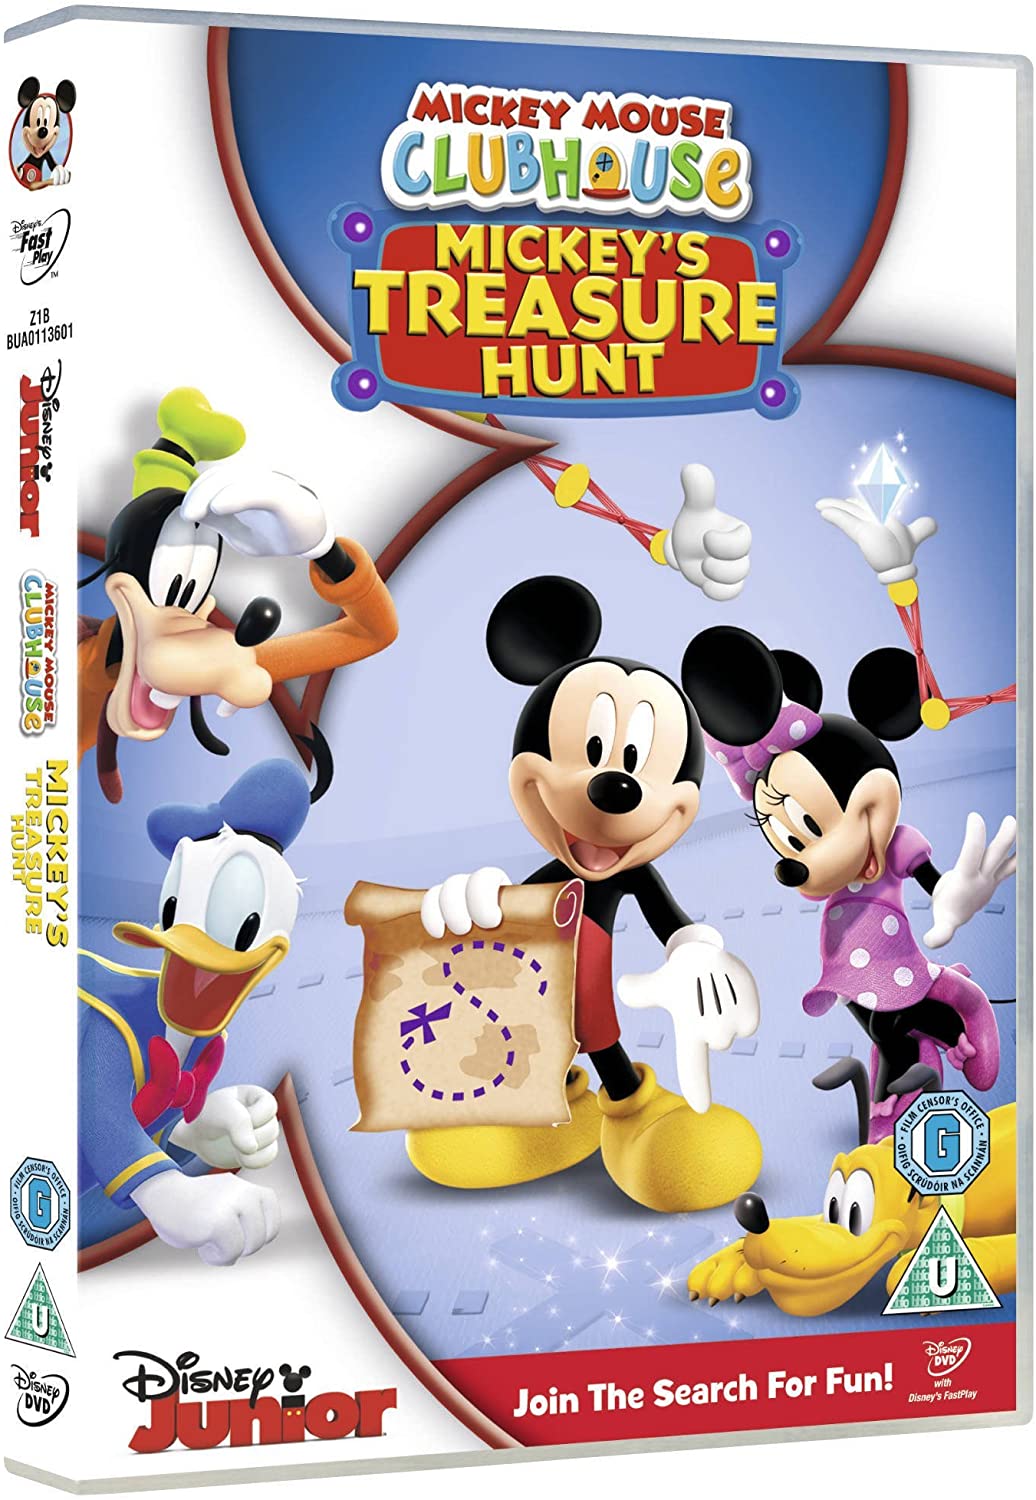 Mickey Mouse Clubhouse - Mickey's Treasure Hunt [DVD]